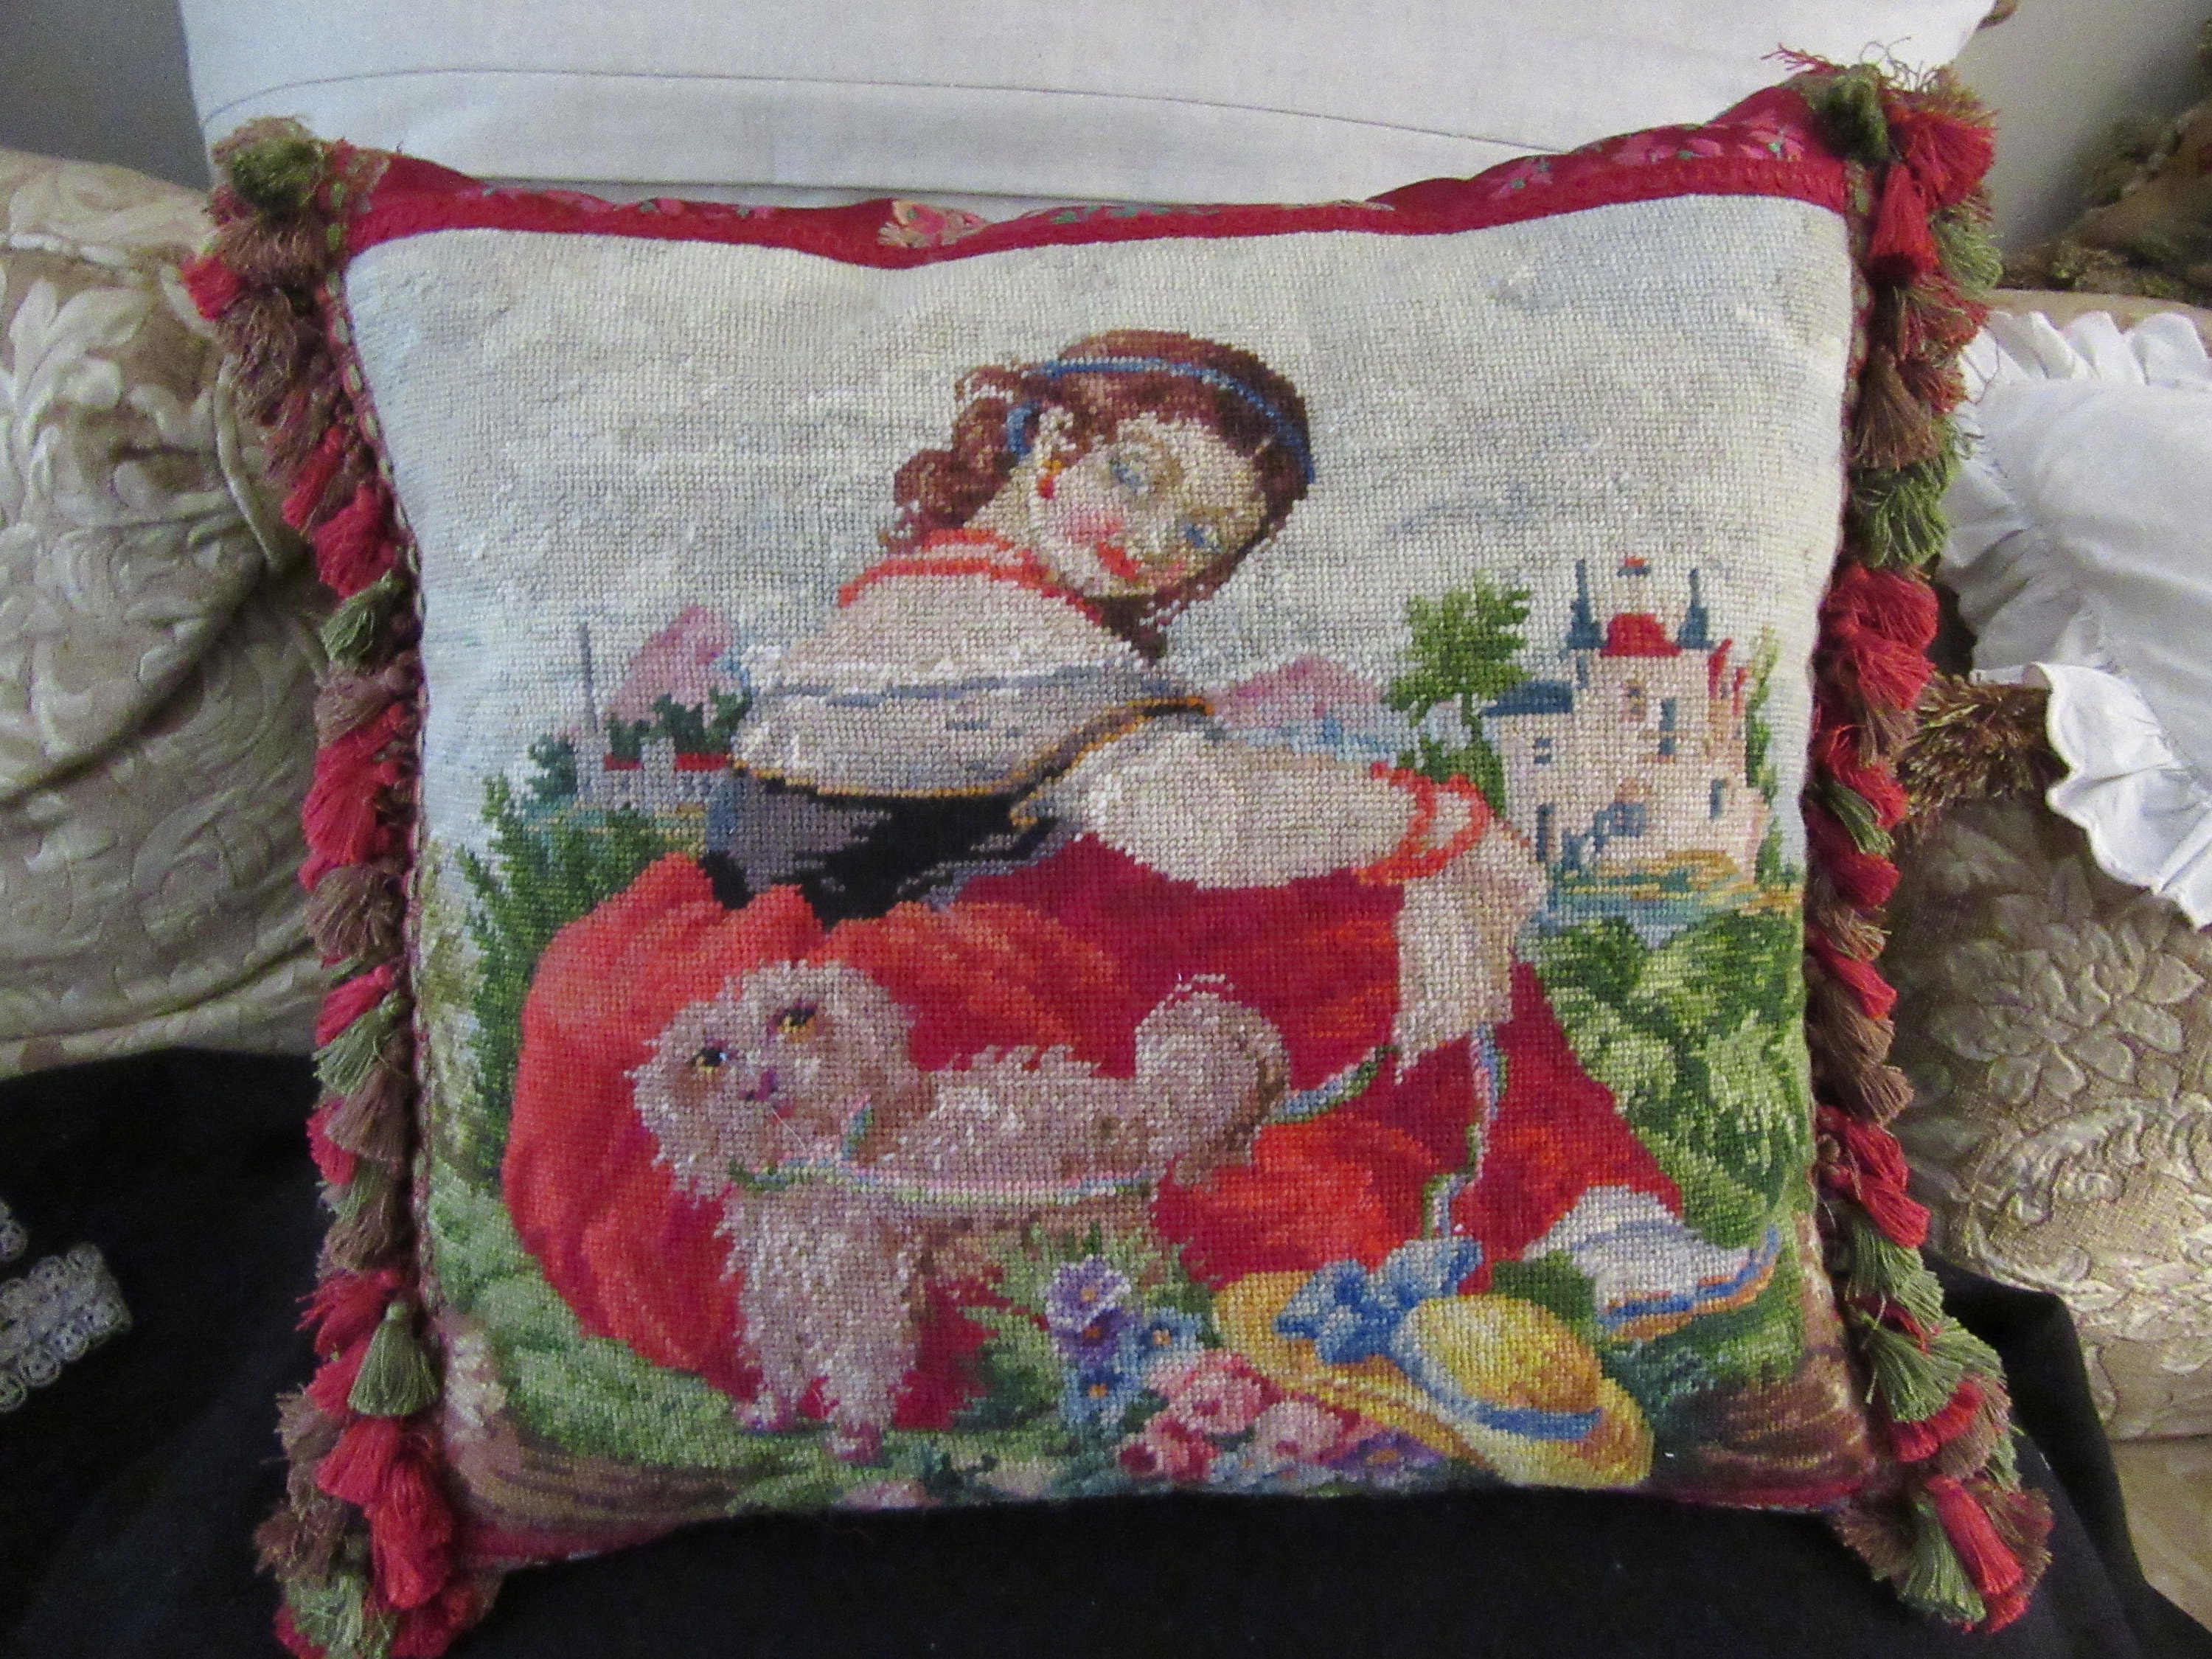 Green 19th-Century French Needlepoint Wool Cushion by By Walid